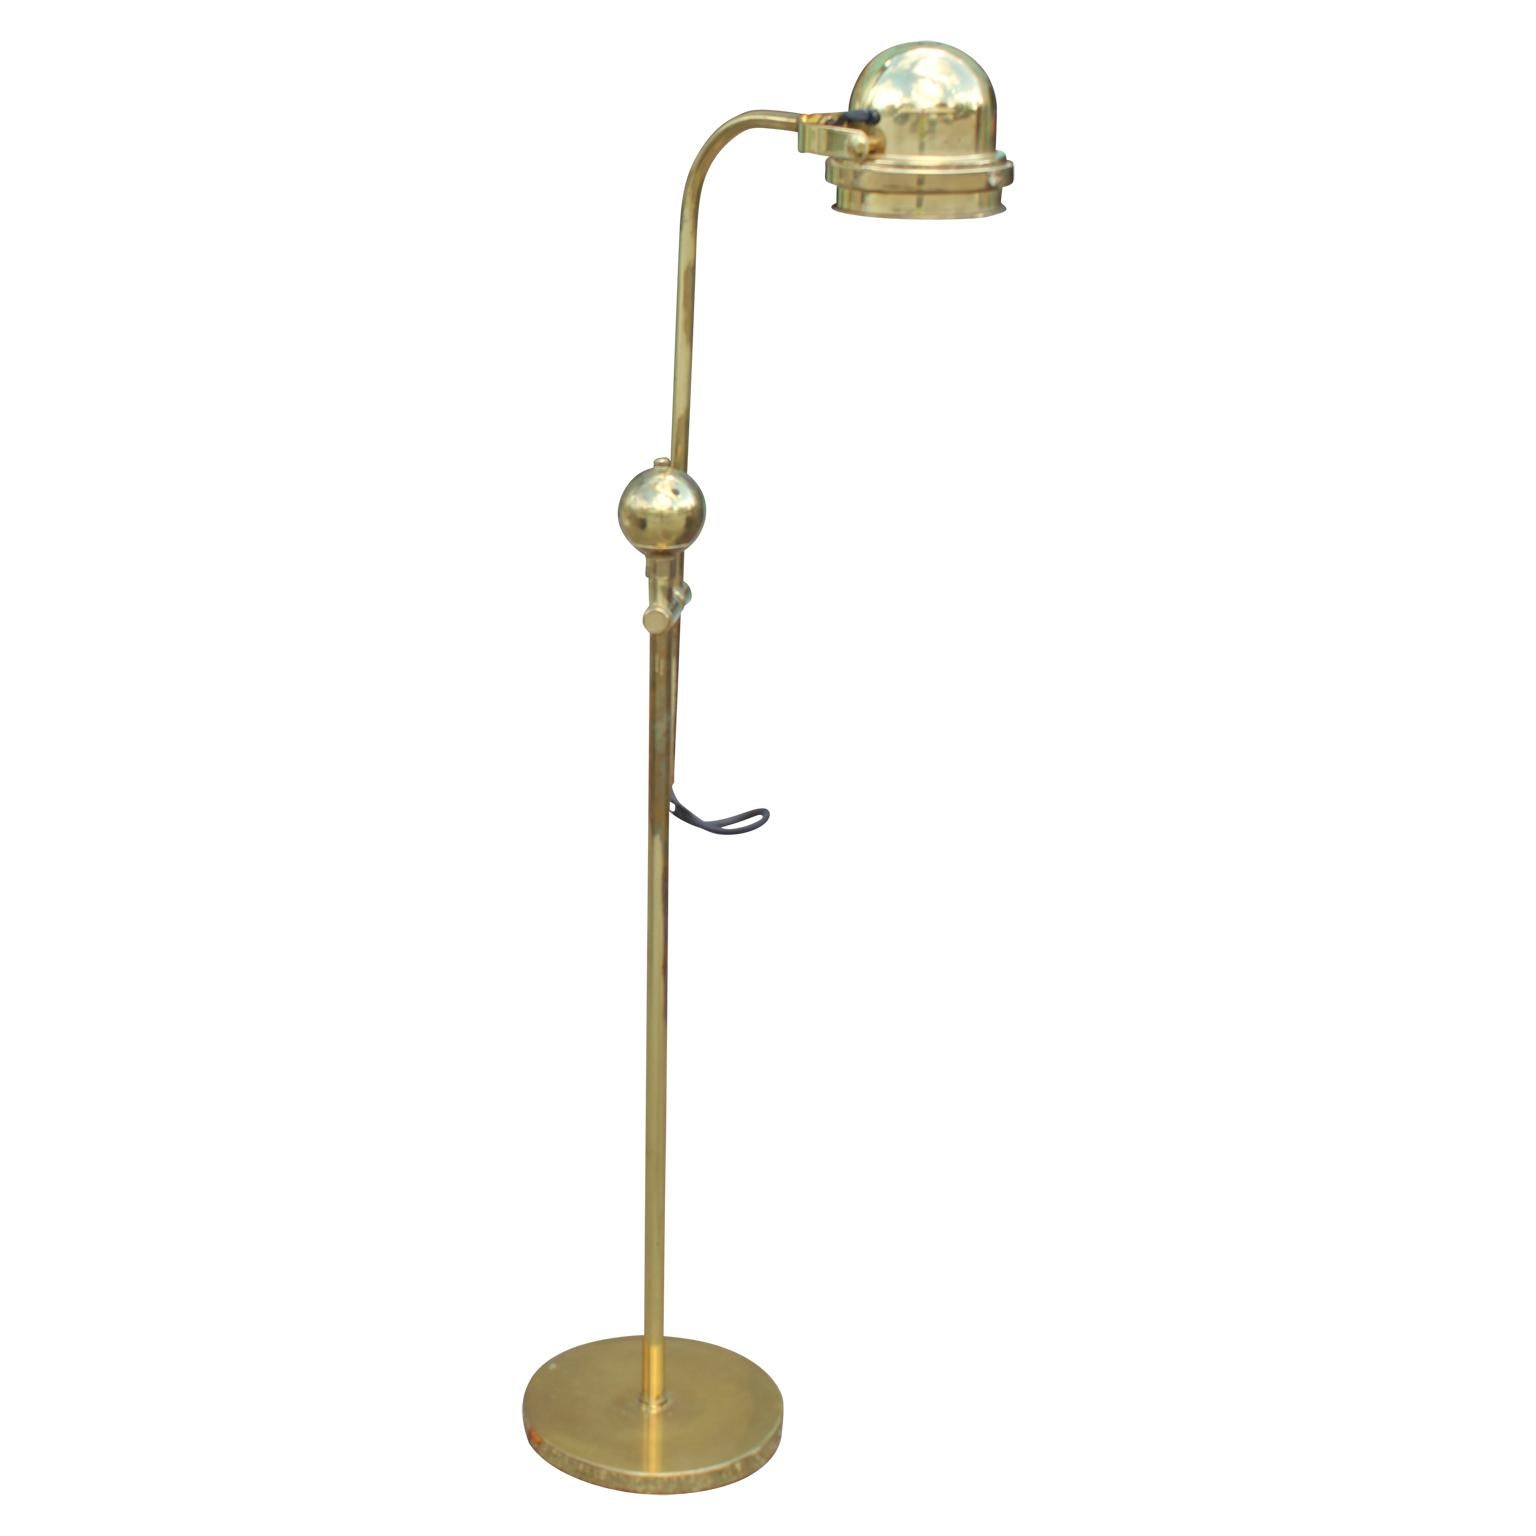 Gorgeous Hollywood Regency style articulating solid brass floor lamp with a nautical design.